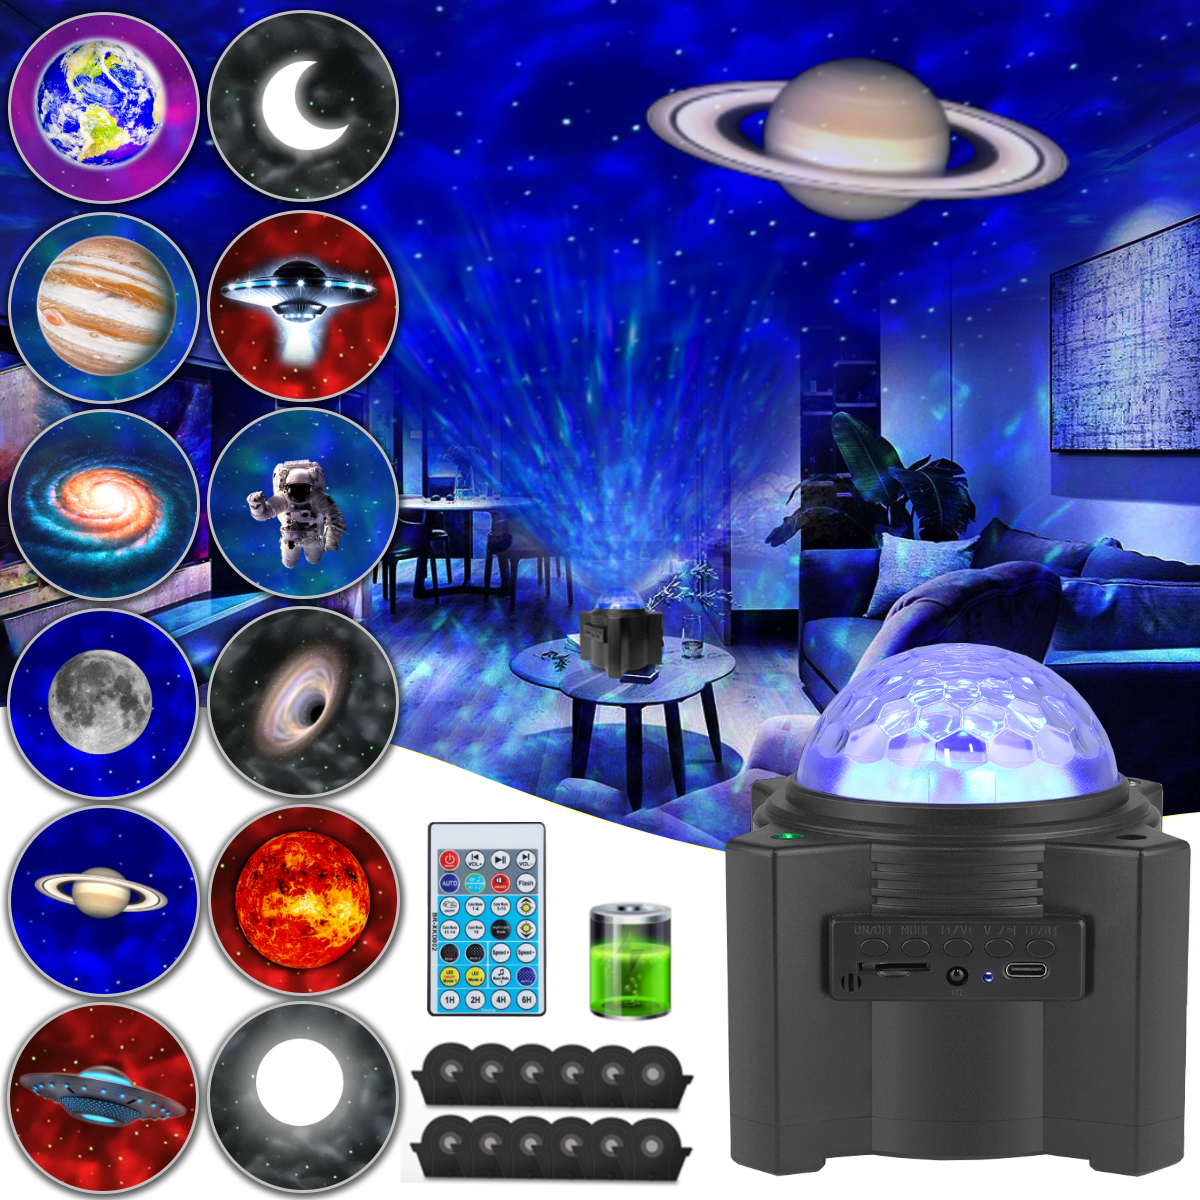 LED-Galaxy-Projector-Nebula-Night-Light-Mood-Lamp-with-Remote-with-Bluetooth-Speaker-for-Kids-and-Ad-1907929-3